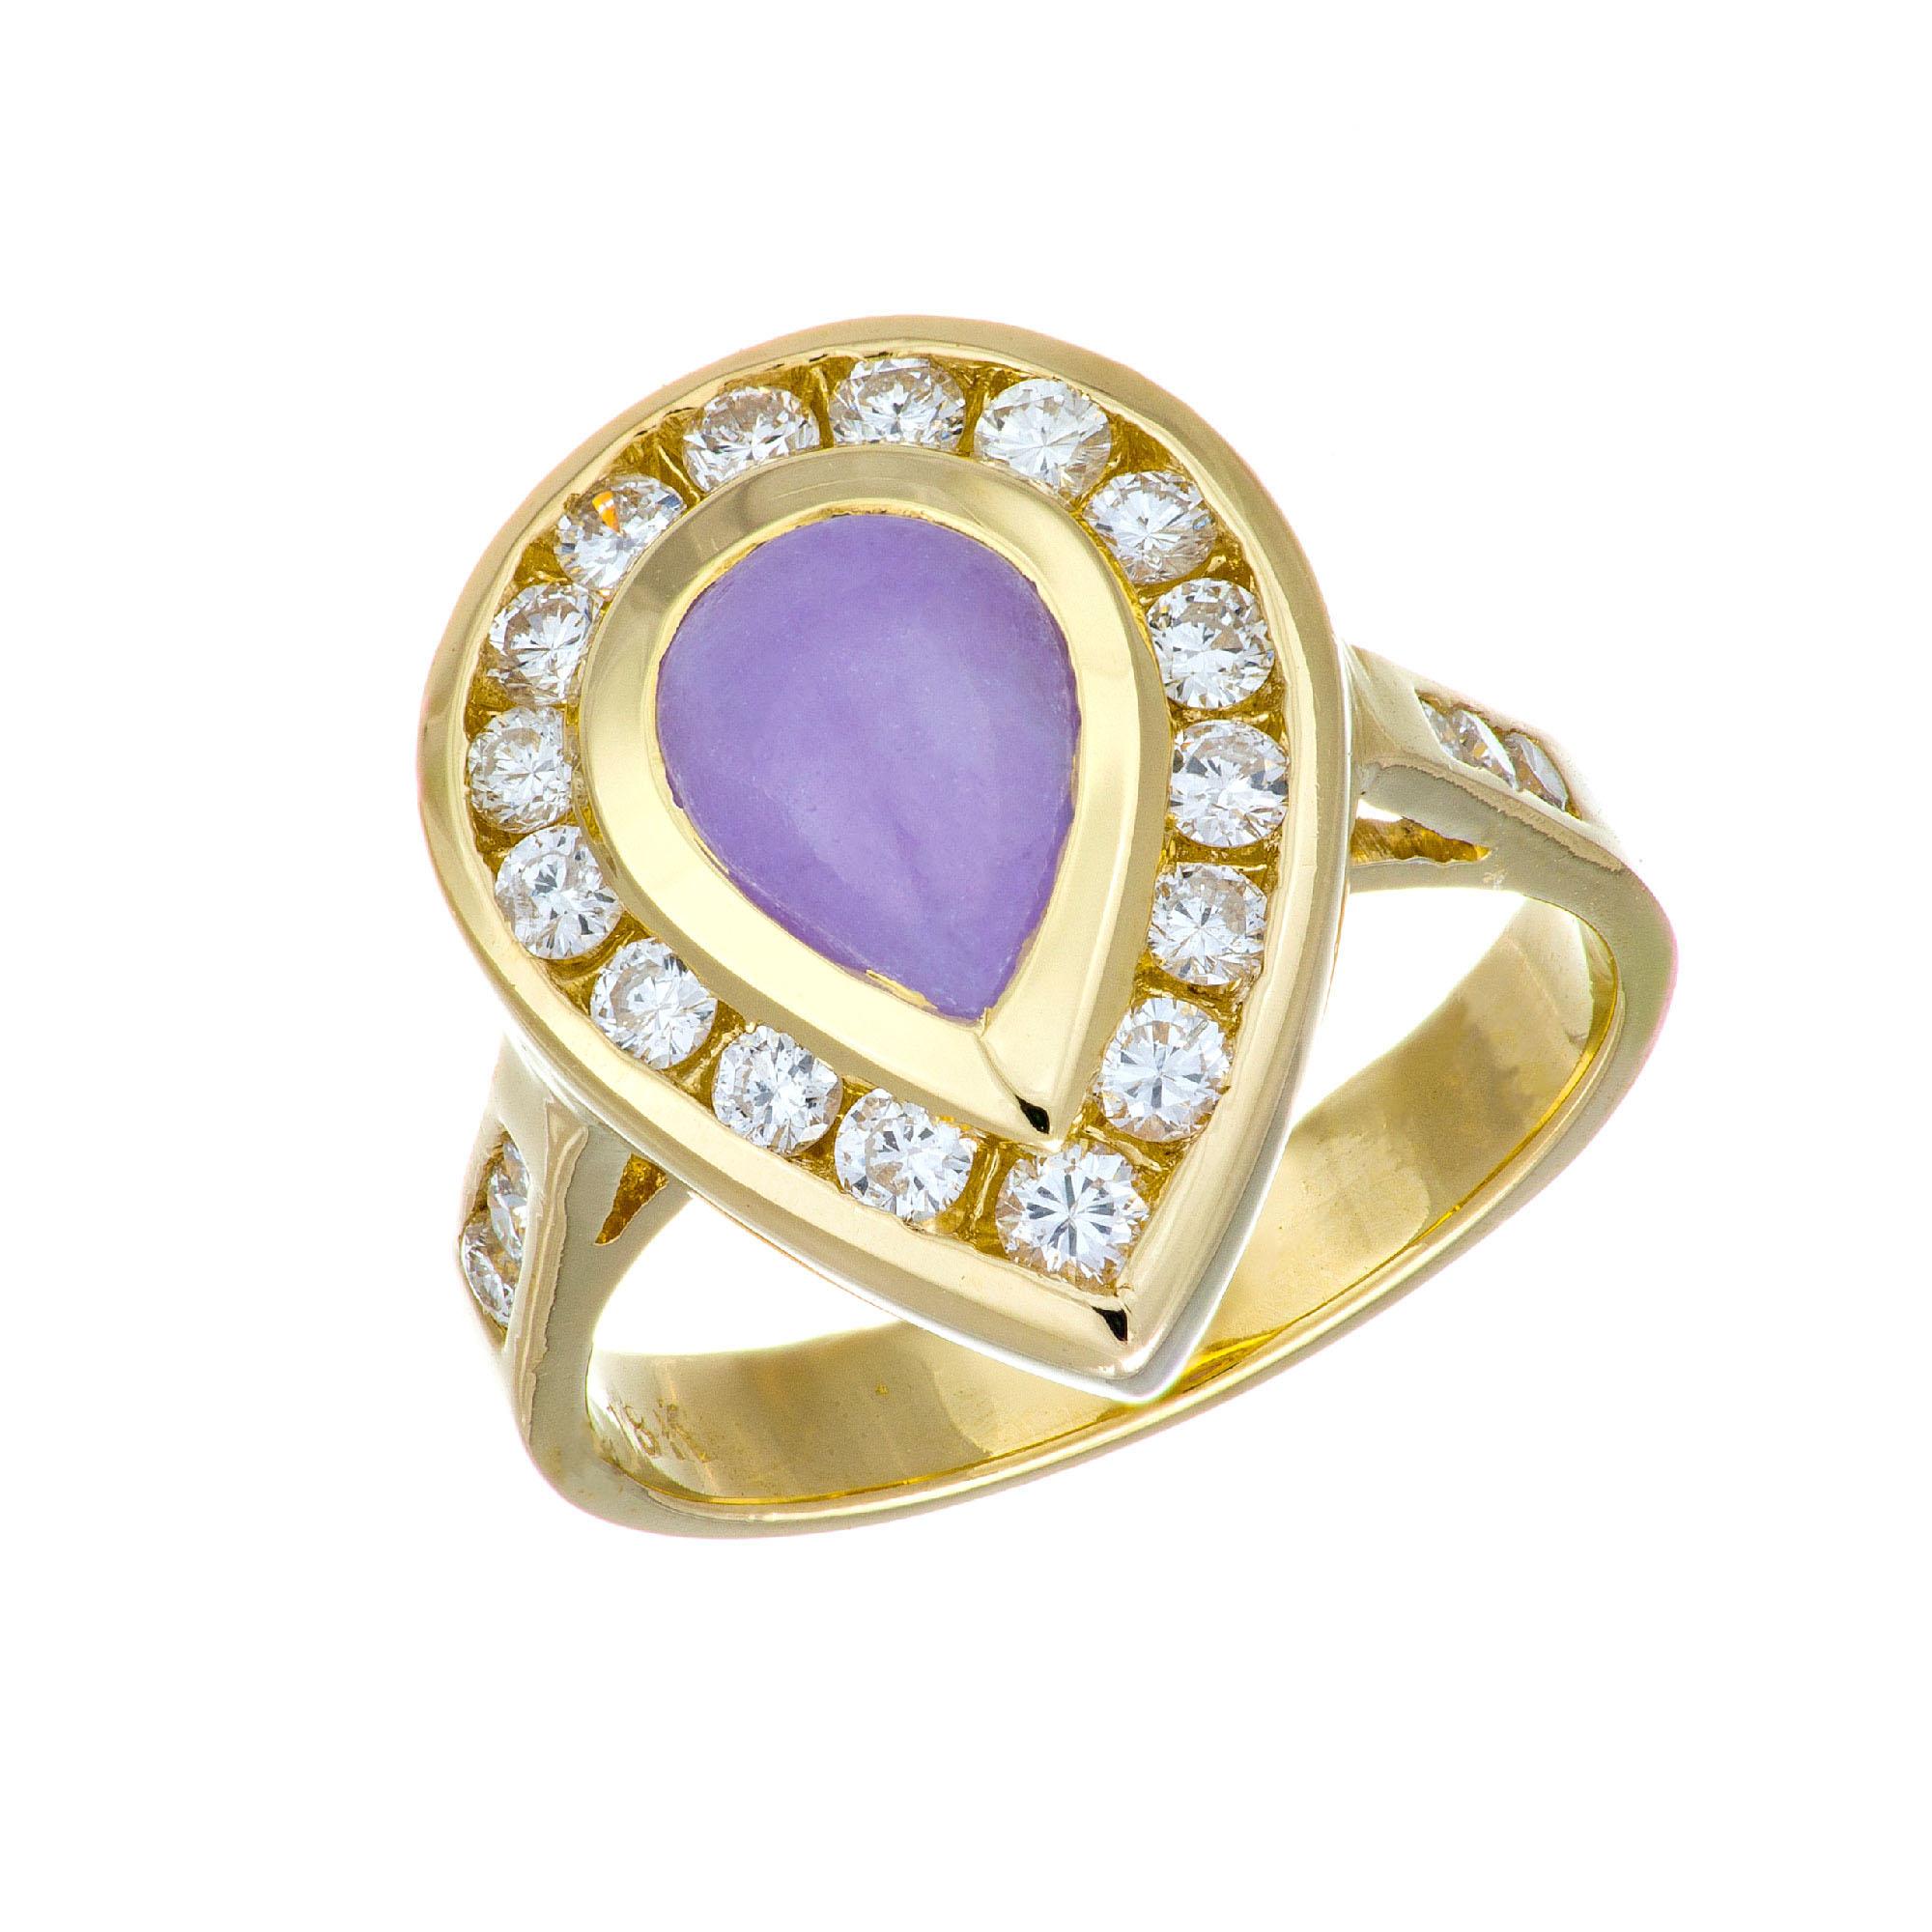 Purple Jadeite Jade in a custom-made pear shape ring. GIA certified pear shaped cabochon Jadeite Jade center stone with a halo of full cut diamonds in a 18k yellow gold setting with diamonds along the shank. 

1 pear shaped cabochon purple Jadeite